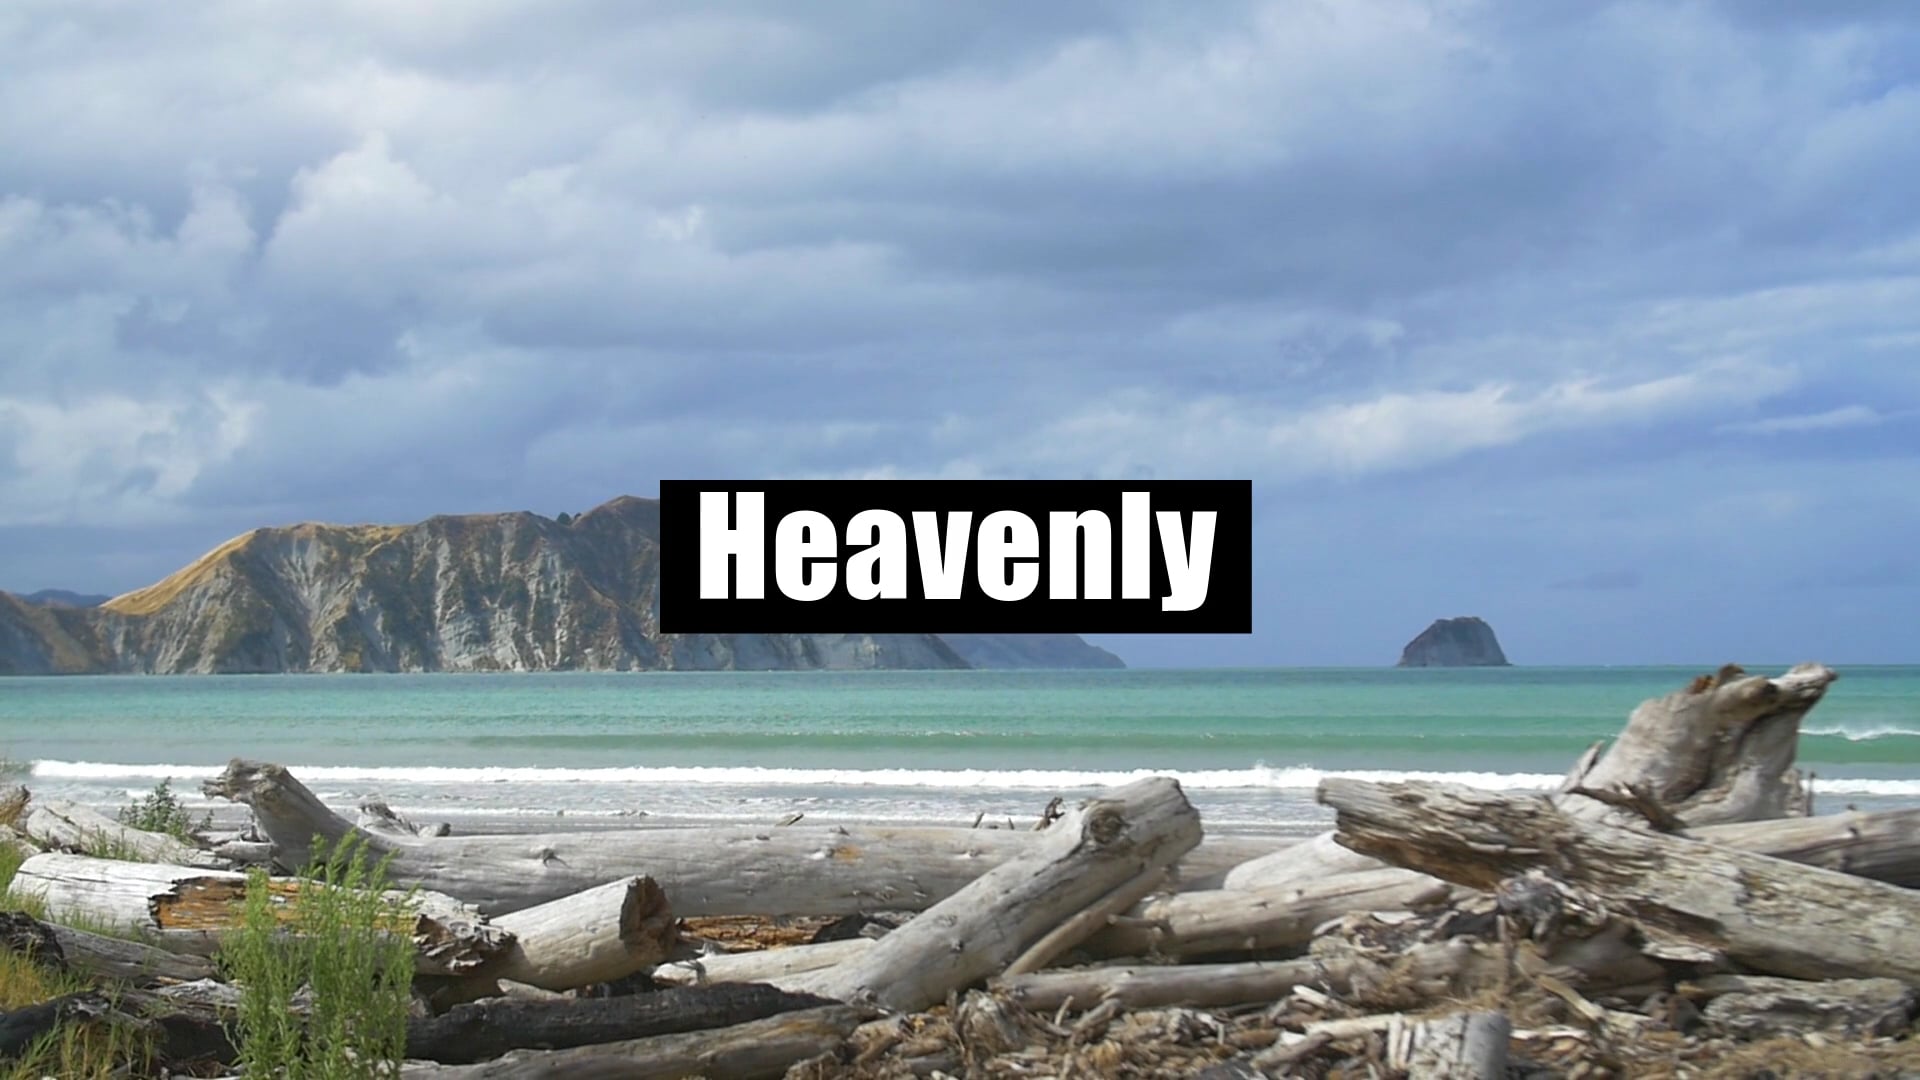 Heavenly by Dylan Tauber